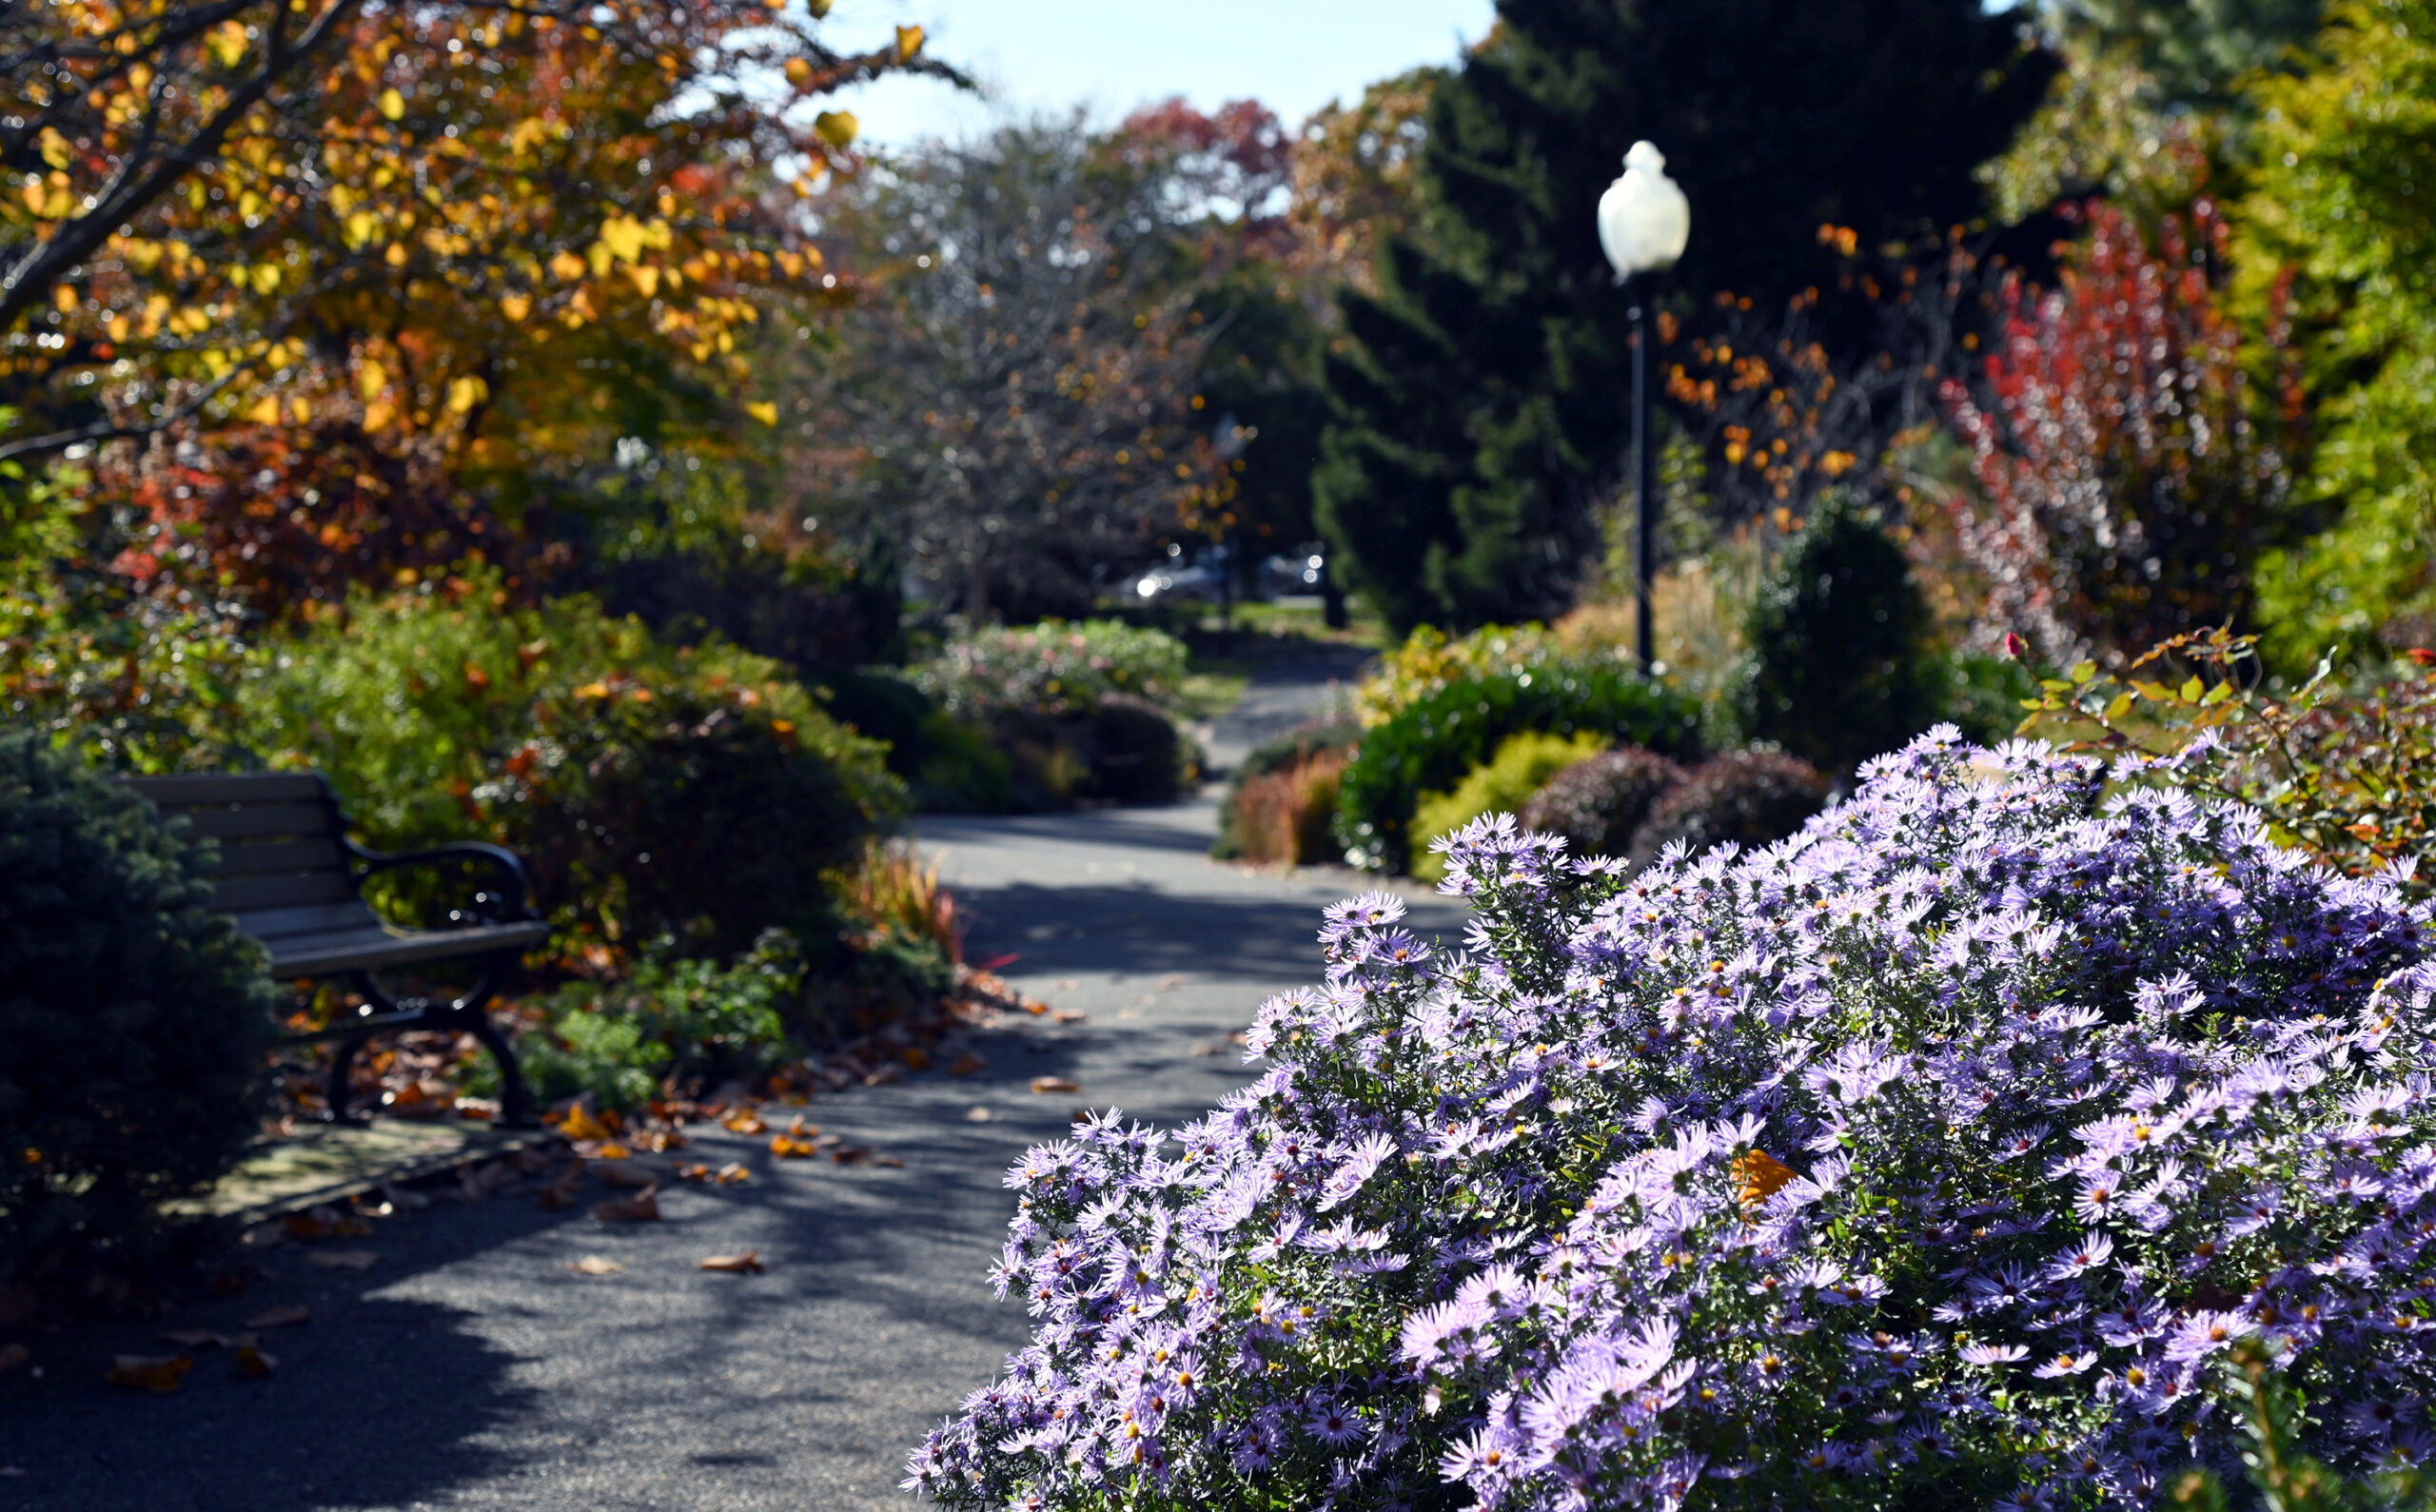 Photograph of the Four Seasons garden pathway with Asters in the foreground